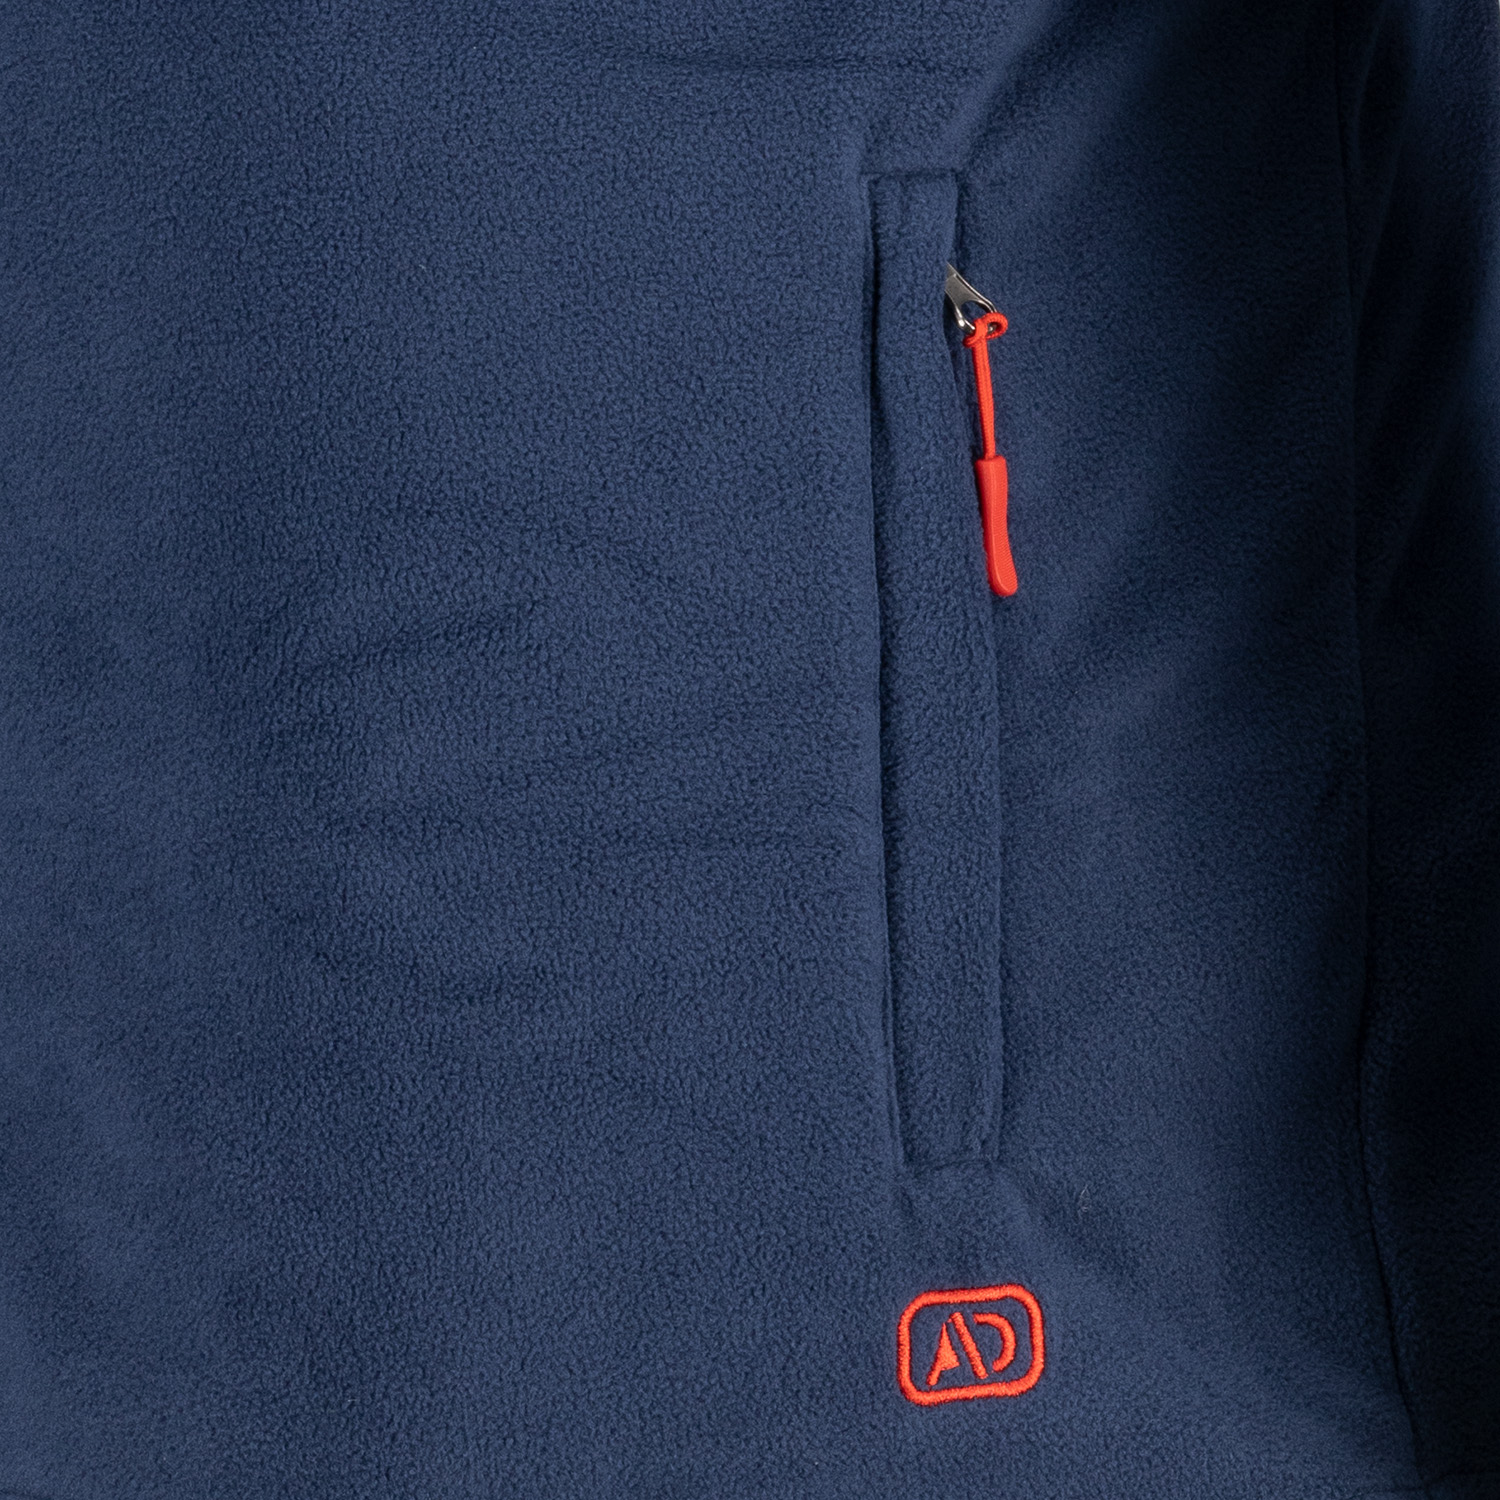 Fleece jacket in navy Series Tampa by Adamo Tall Fit extra long in long sizes up to 5XLT